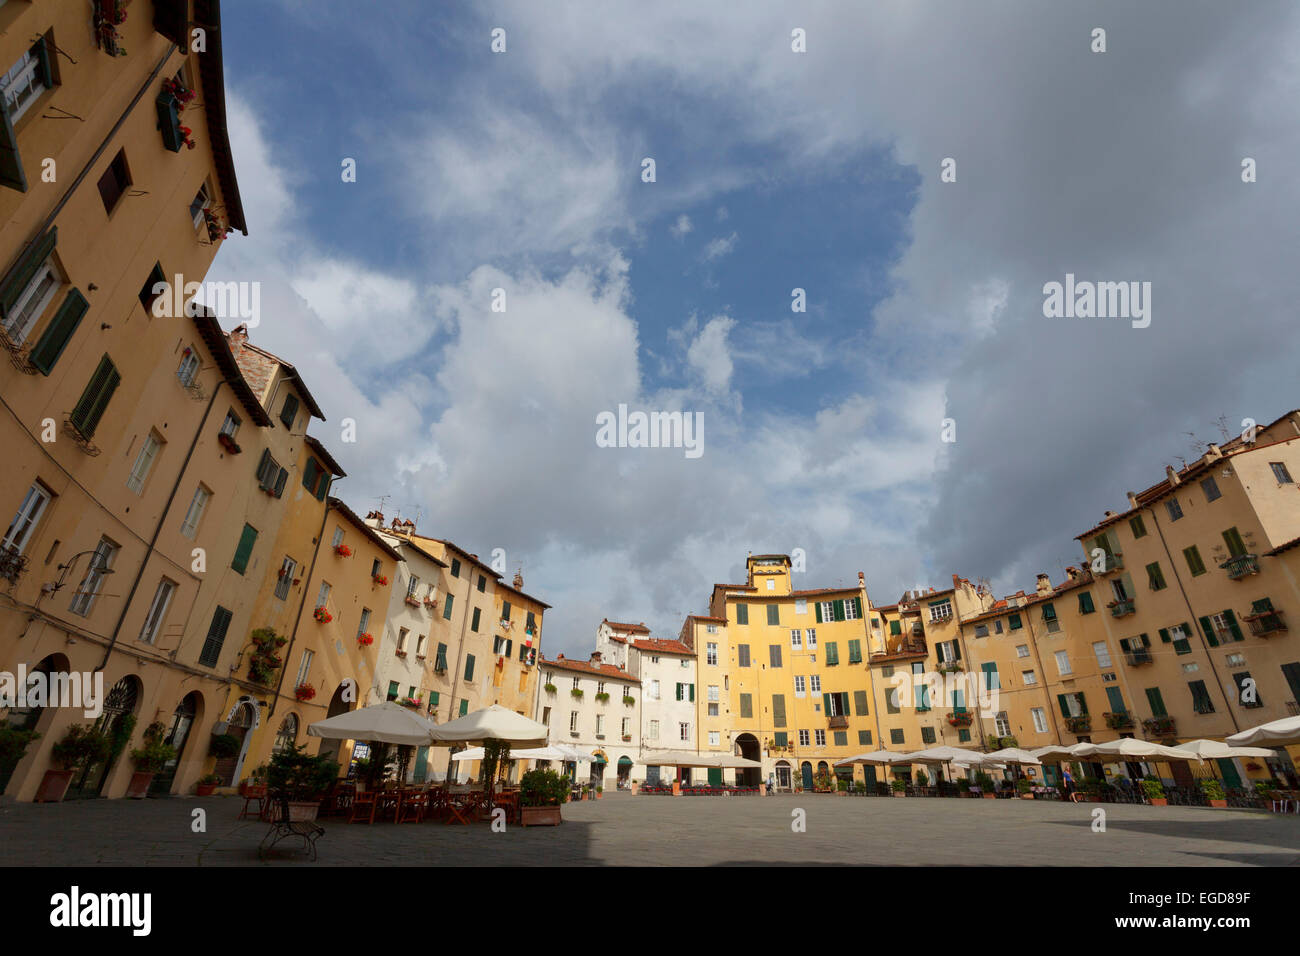 Piazza dell Anfiteatro square with restaurants in the historic centre of Lucca, UNESCO World Heritage Site, Tuscany, Italy, Europe Stock Photo